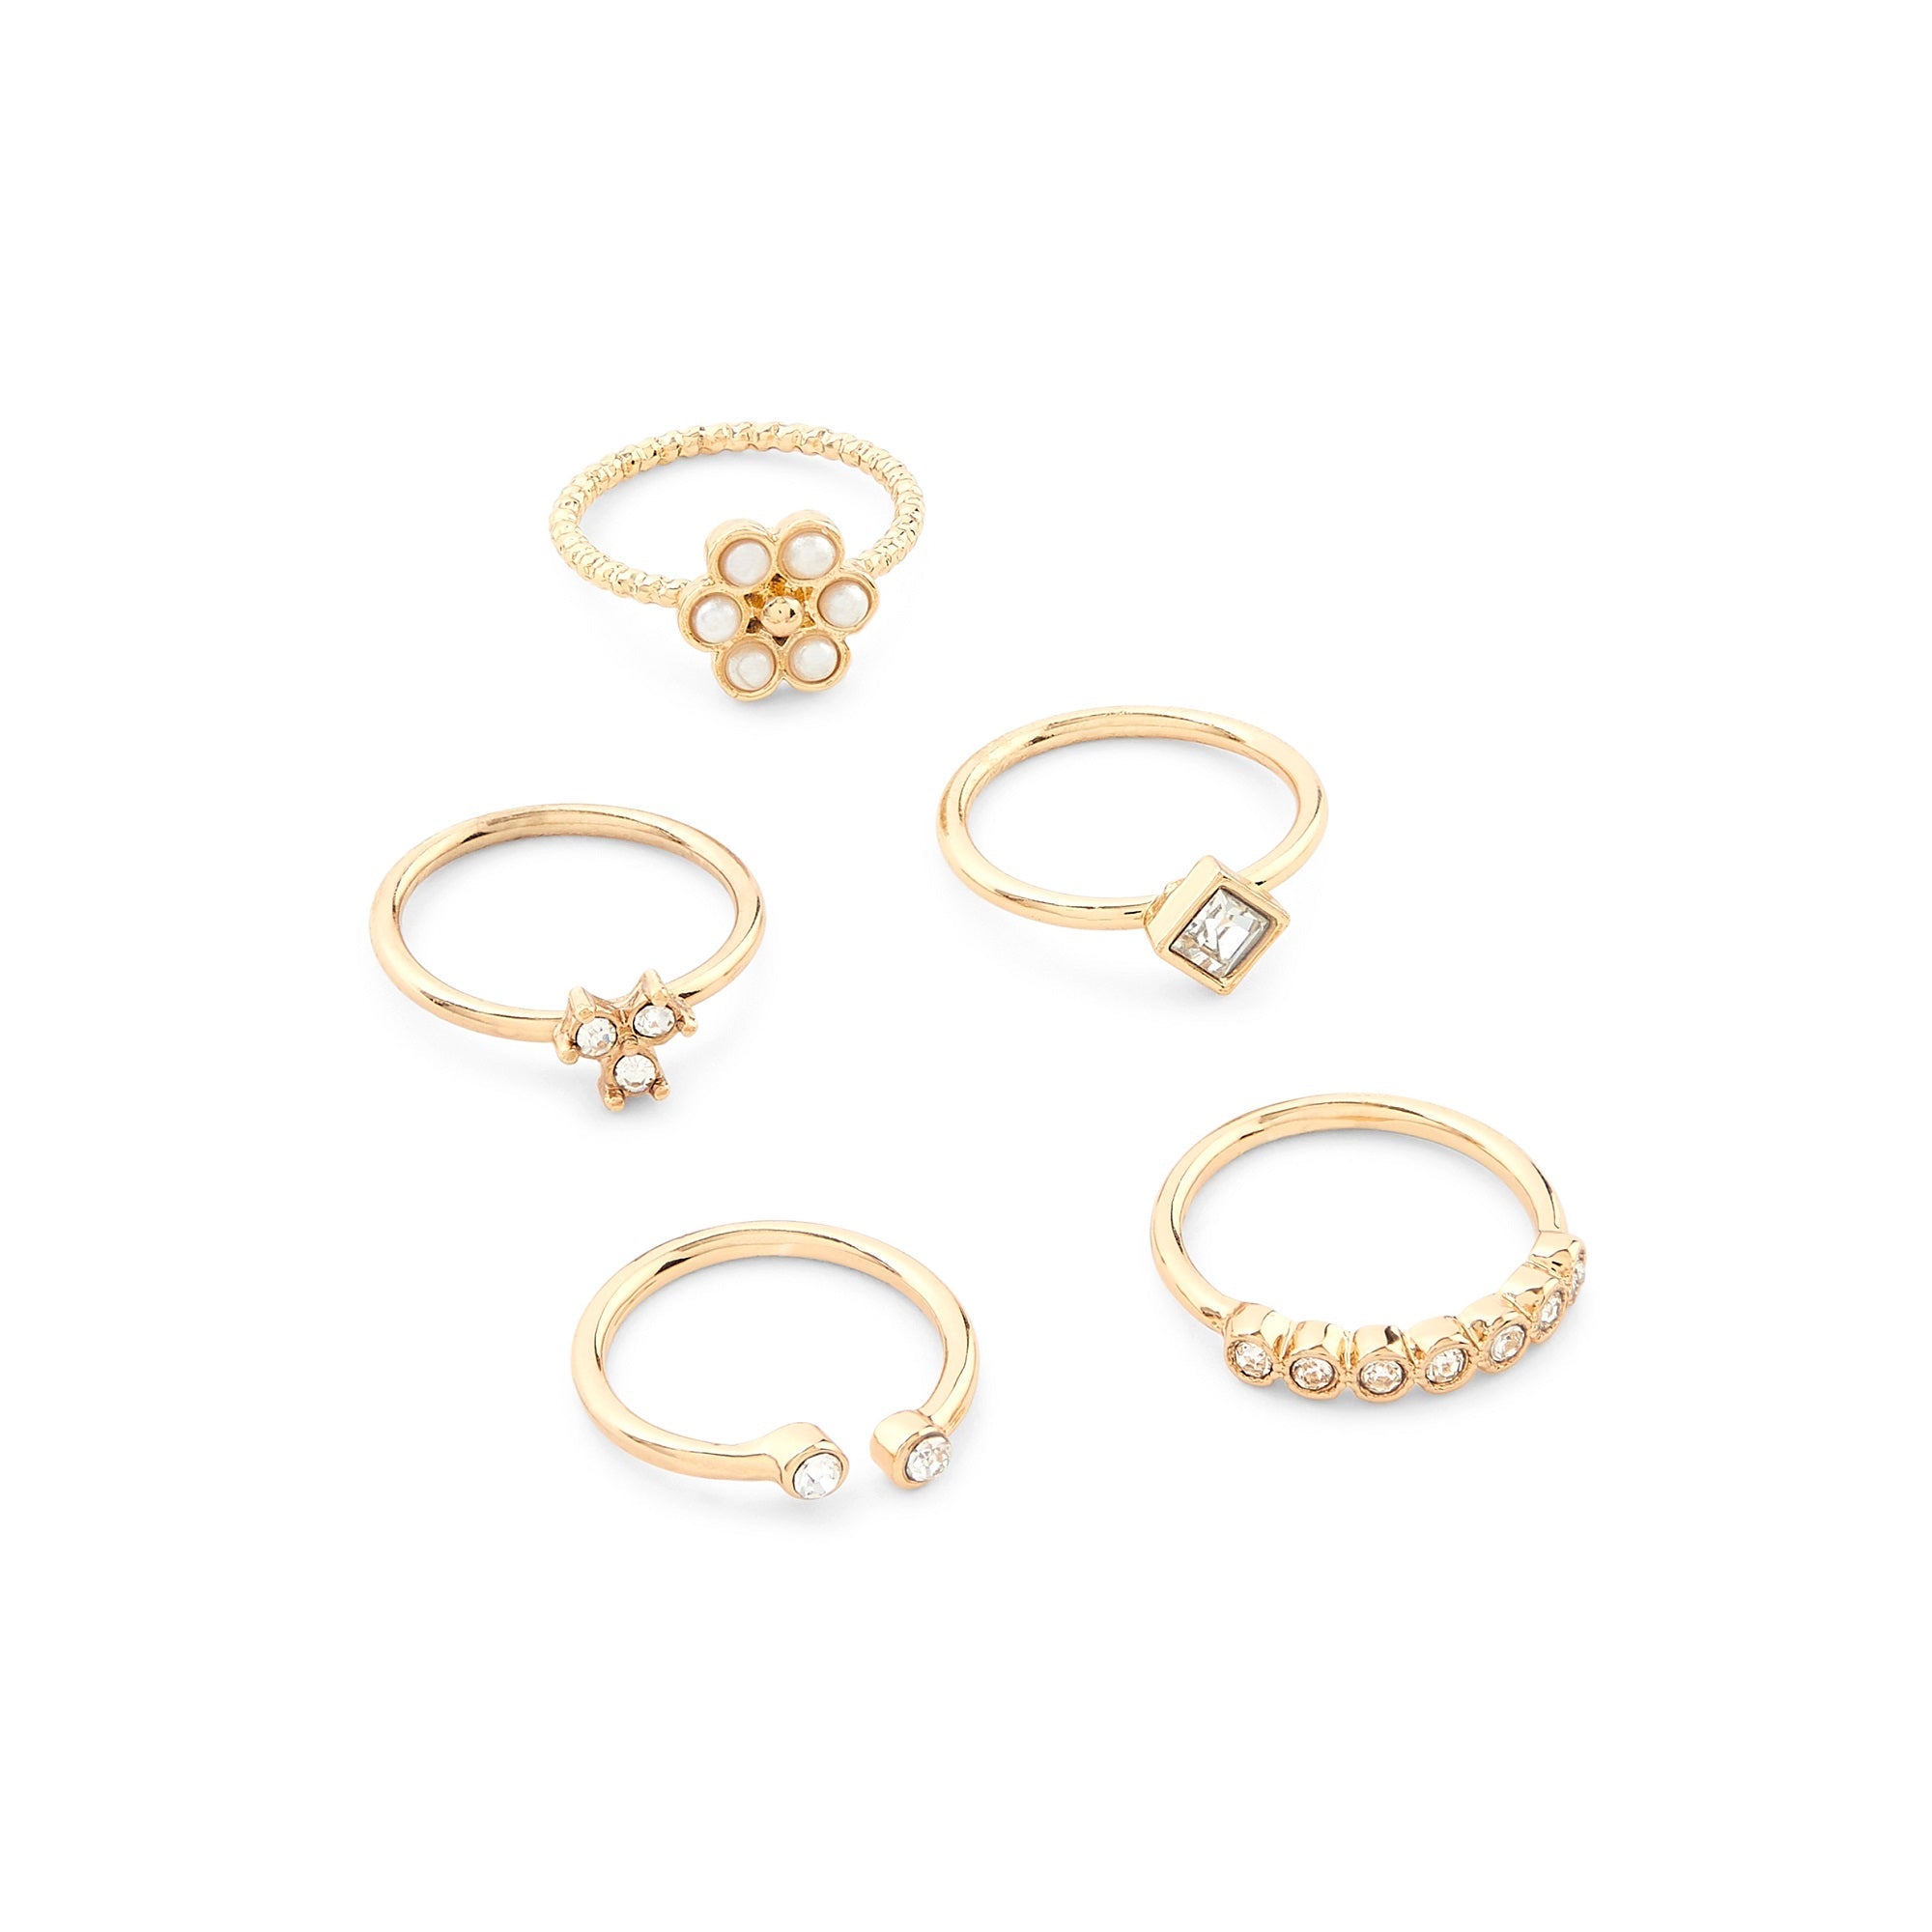 Accessorize London Women's Gold Set of 5 Pearl Flower Stacking Ring Pack -Large